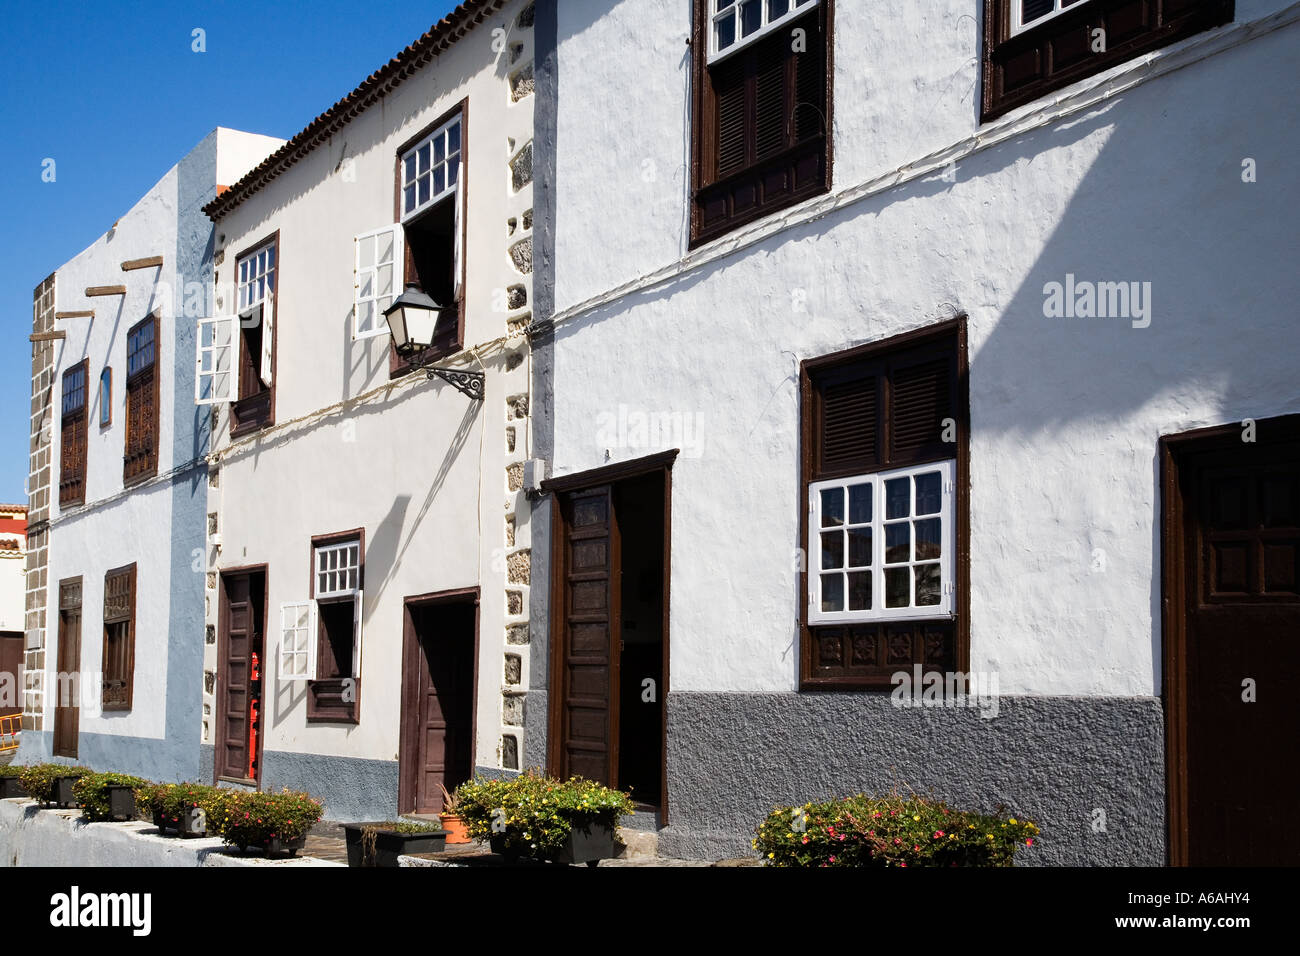 Pretty White Buildings in the Old Town of Garachico Tenerife Canary Islands Spain Stock Photo